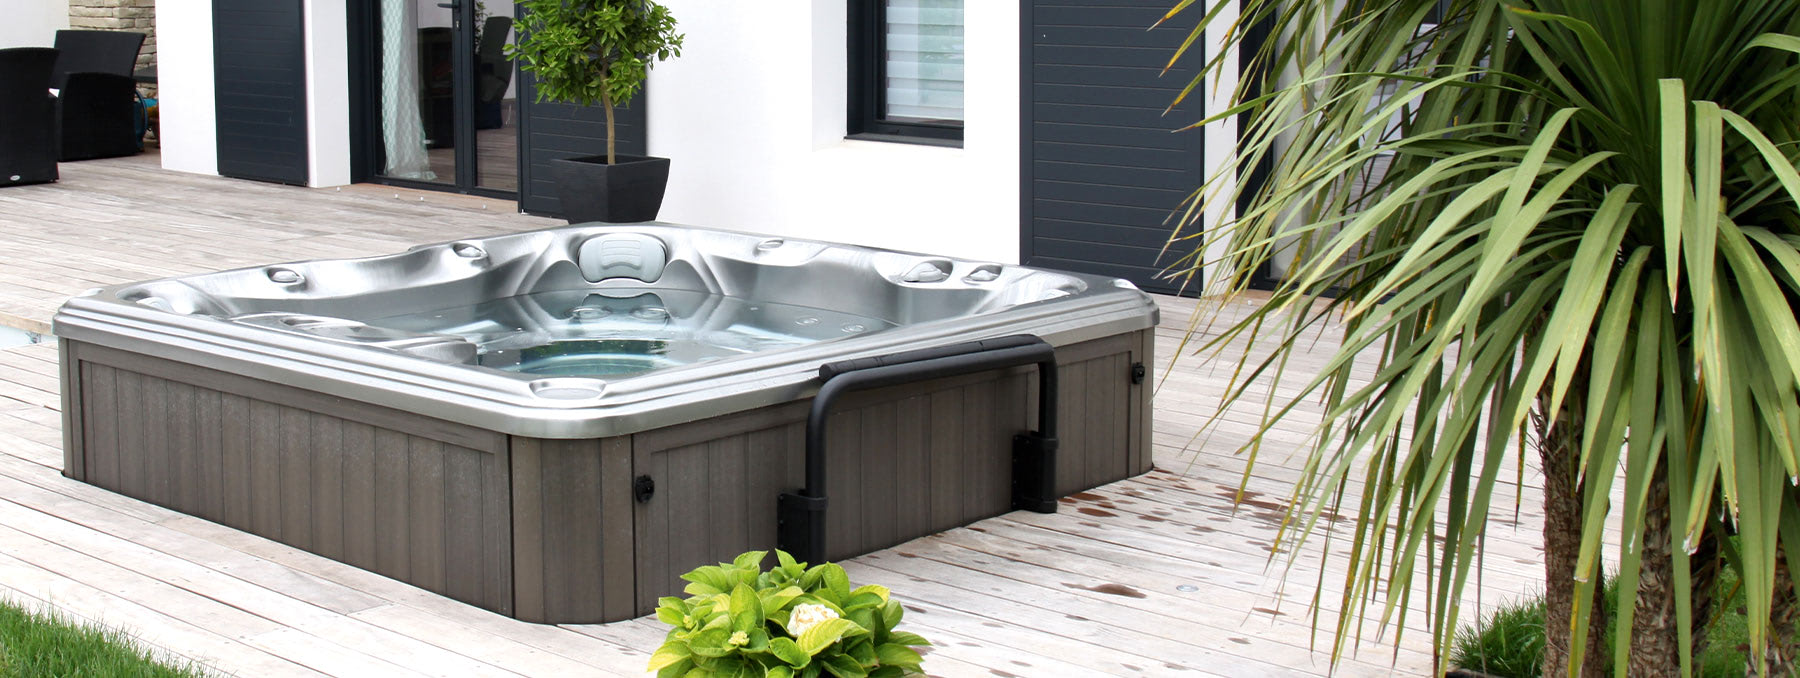 Hot Tub Learning Resource Center for Buyers